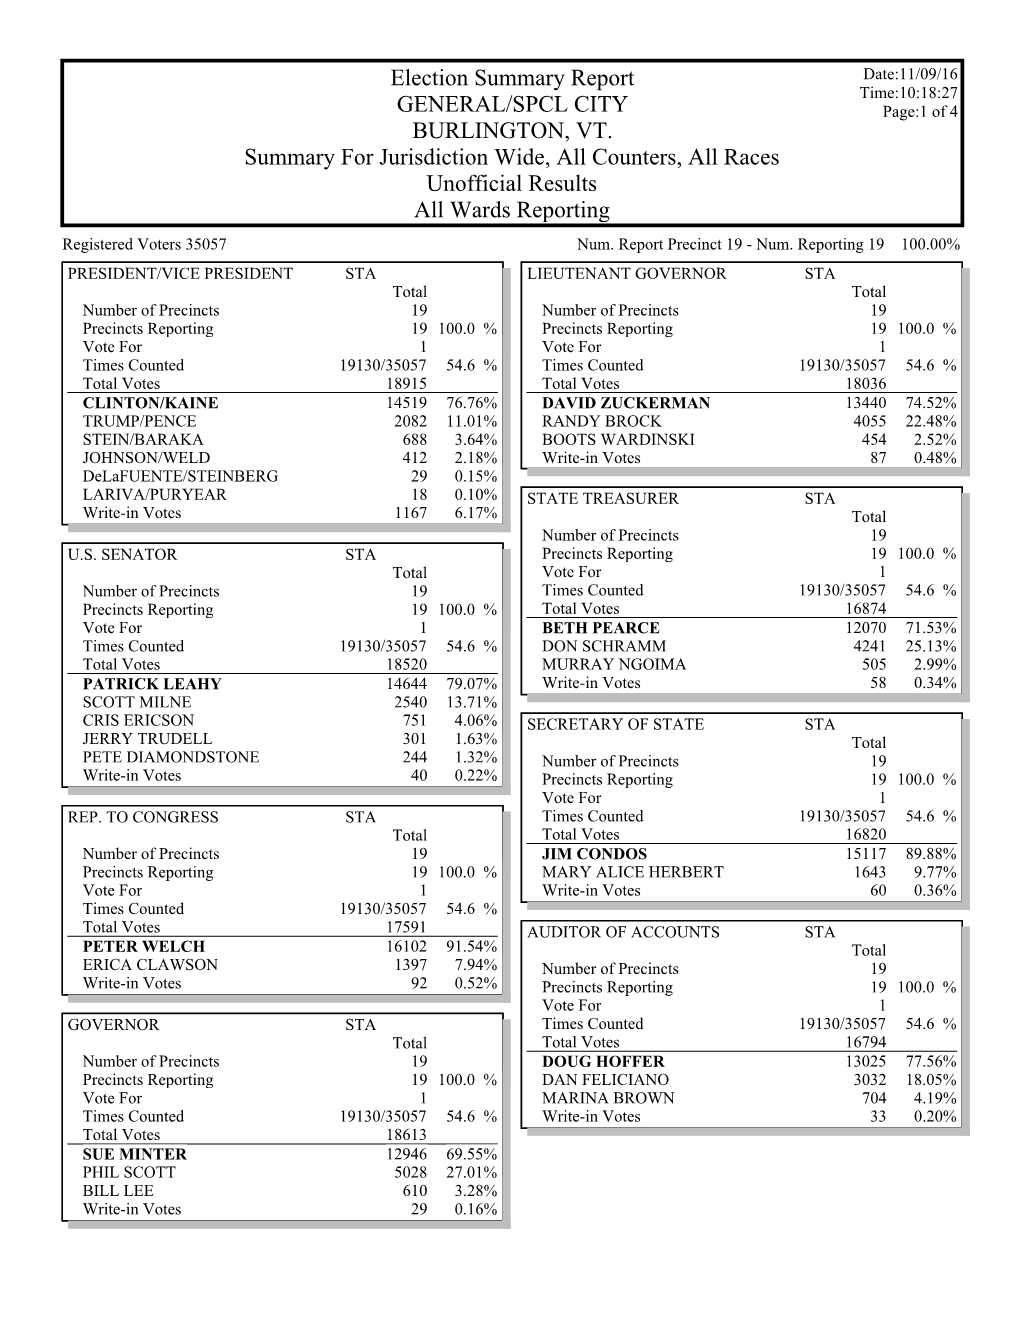 Election Summary Report Date:11/09/16 Time:10:18:27 GENERAL/SPCL CITY Page:1 of 4 BURLINGTON, VT